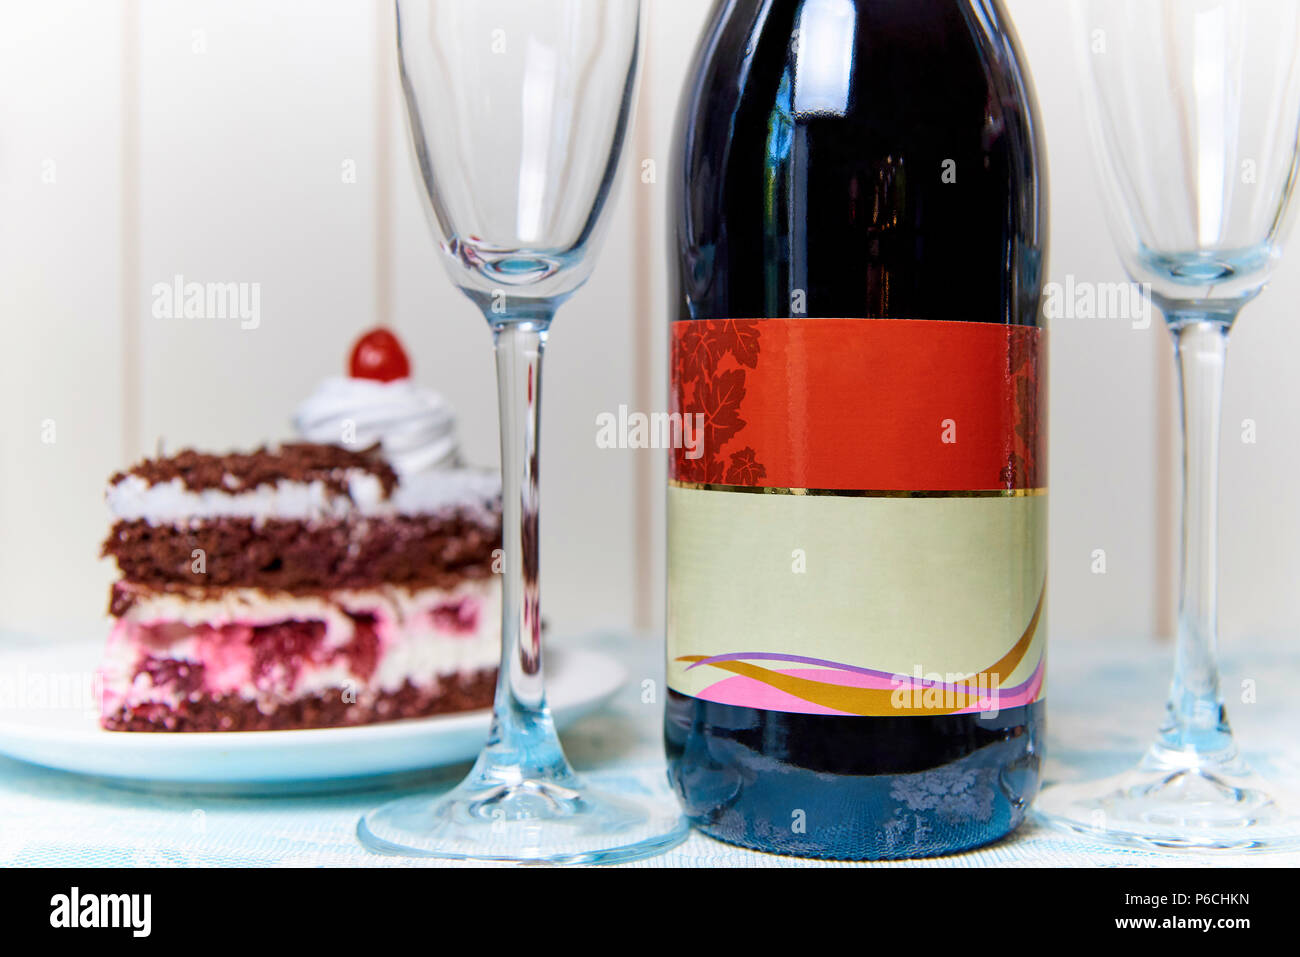 A bottle of red wine on a blurred background of a cake with cherries and wineglass. Stock Photo